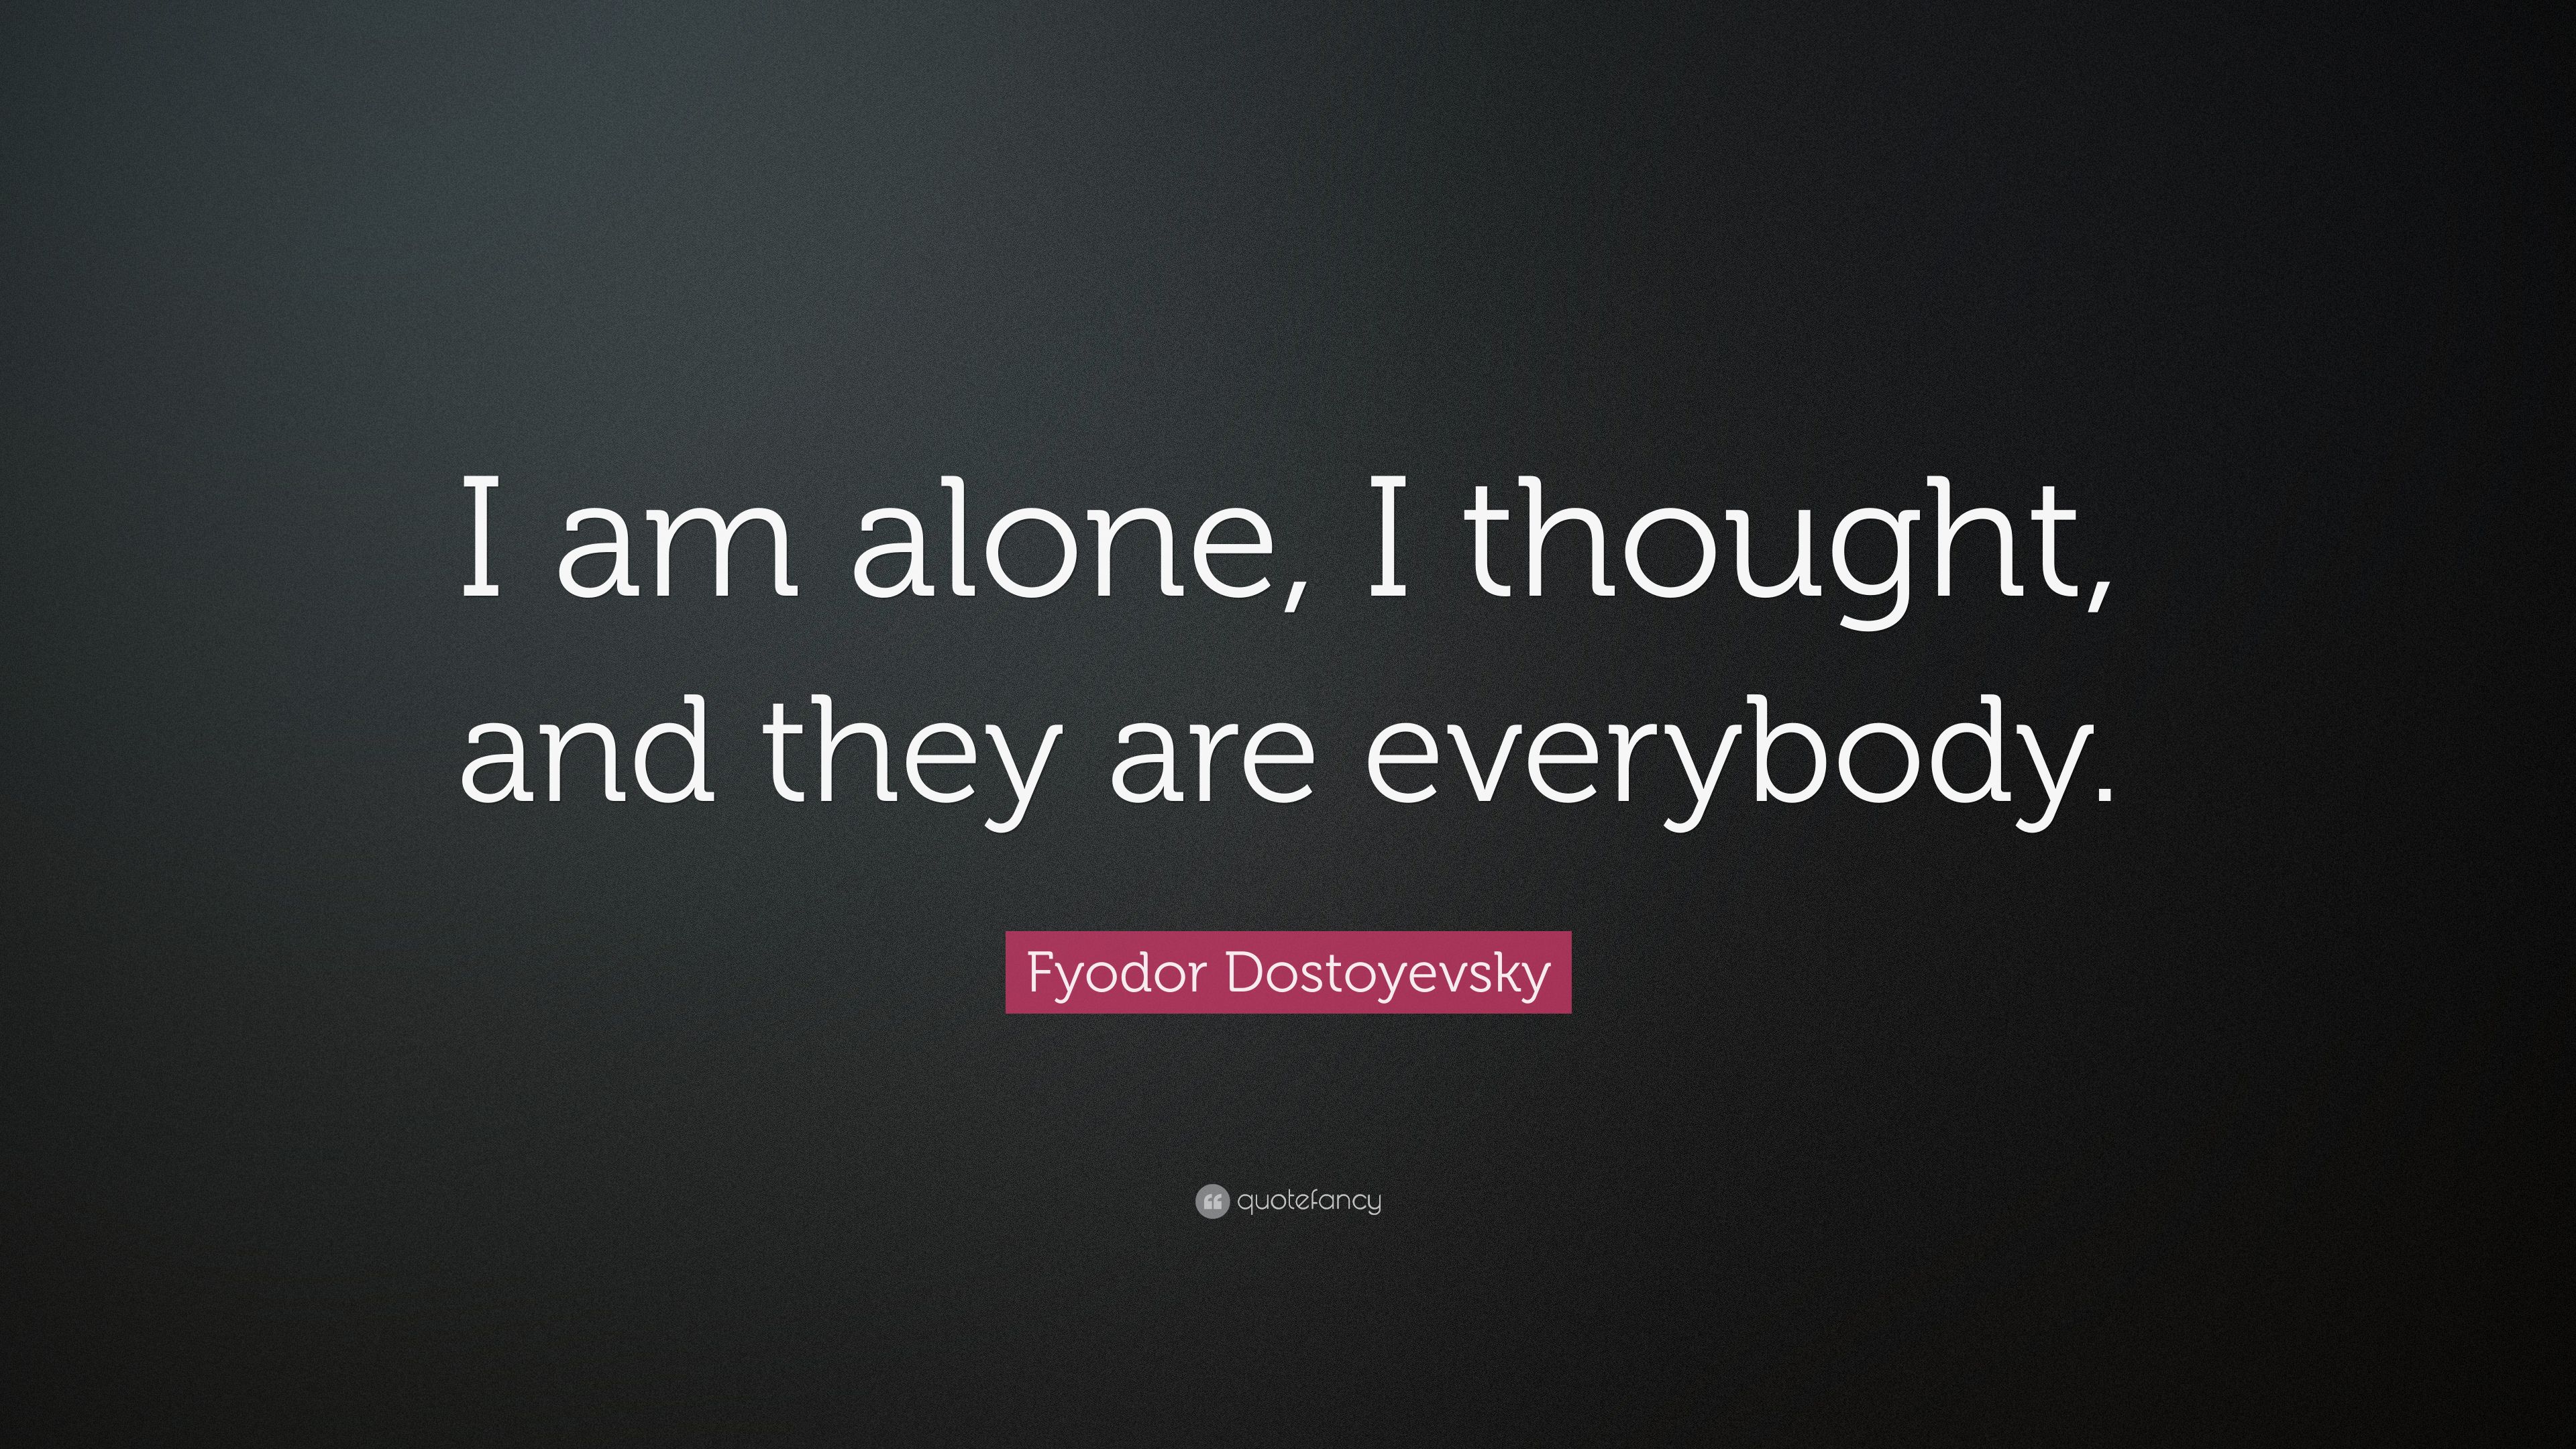 Fyodor Dostoyevsky Quote: “I am alone, I thought, and they are